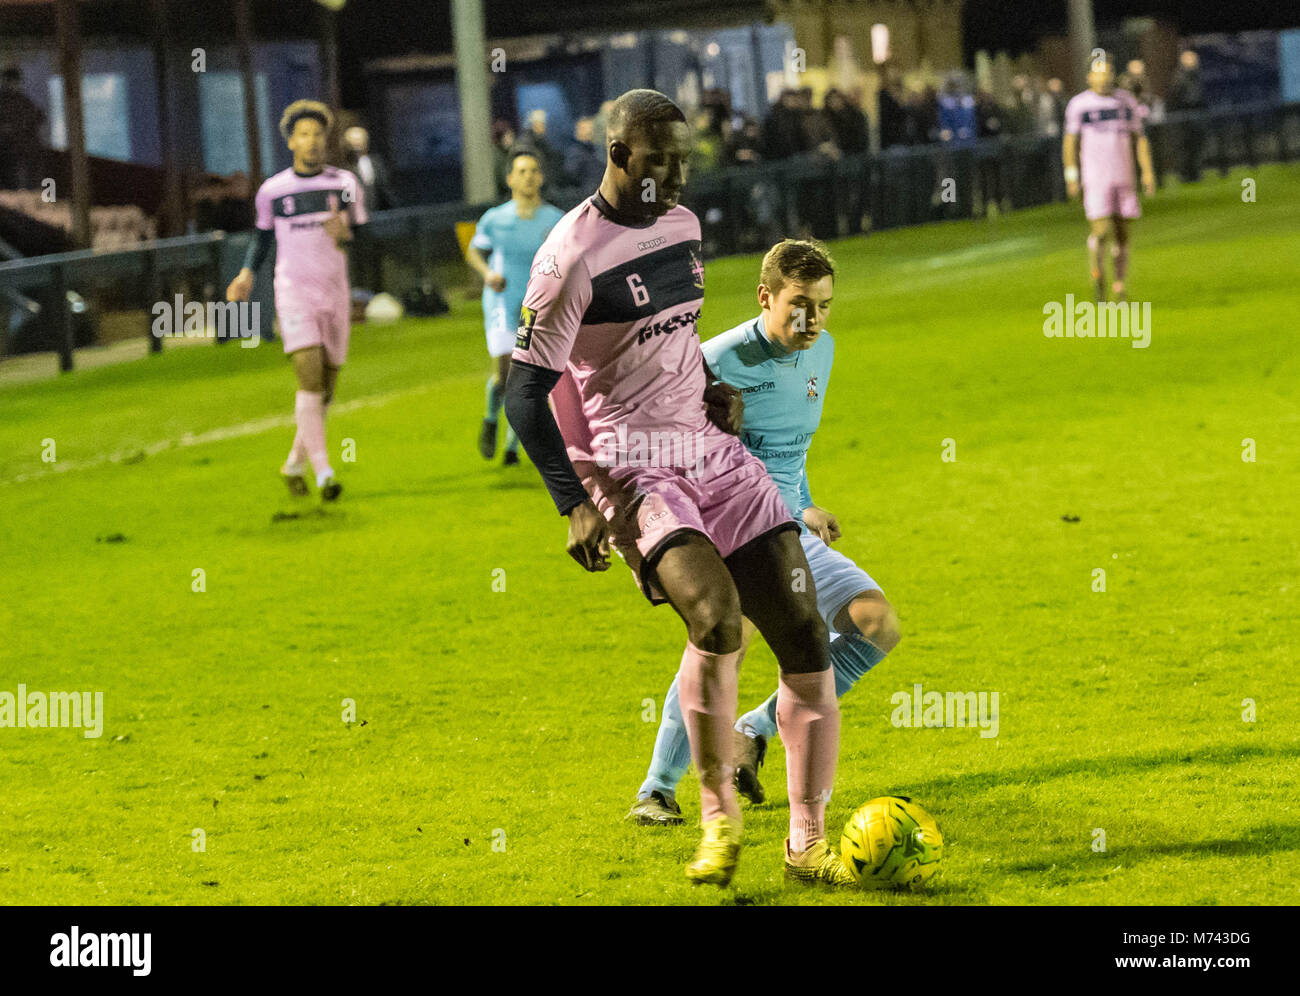 Brentwood, 8th March 2018, Brentwood FC (0) vs Dulwich Hamlets FC (1) in the Velocity Trophy Quarter Final: Anthony Archeampon (6) of Dulwhich Hamlets takes the ball Credit: Ian Davidson/Alamy Live News Stock Photo